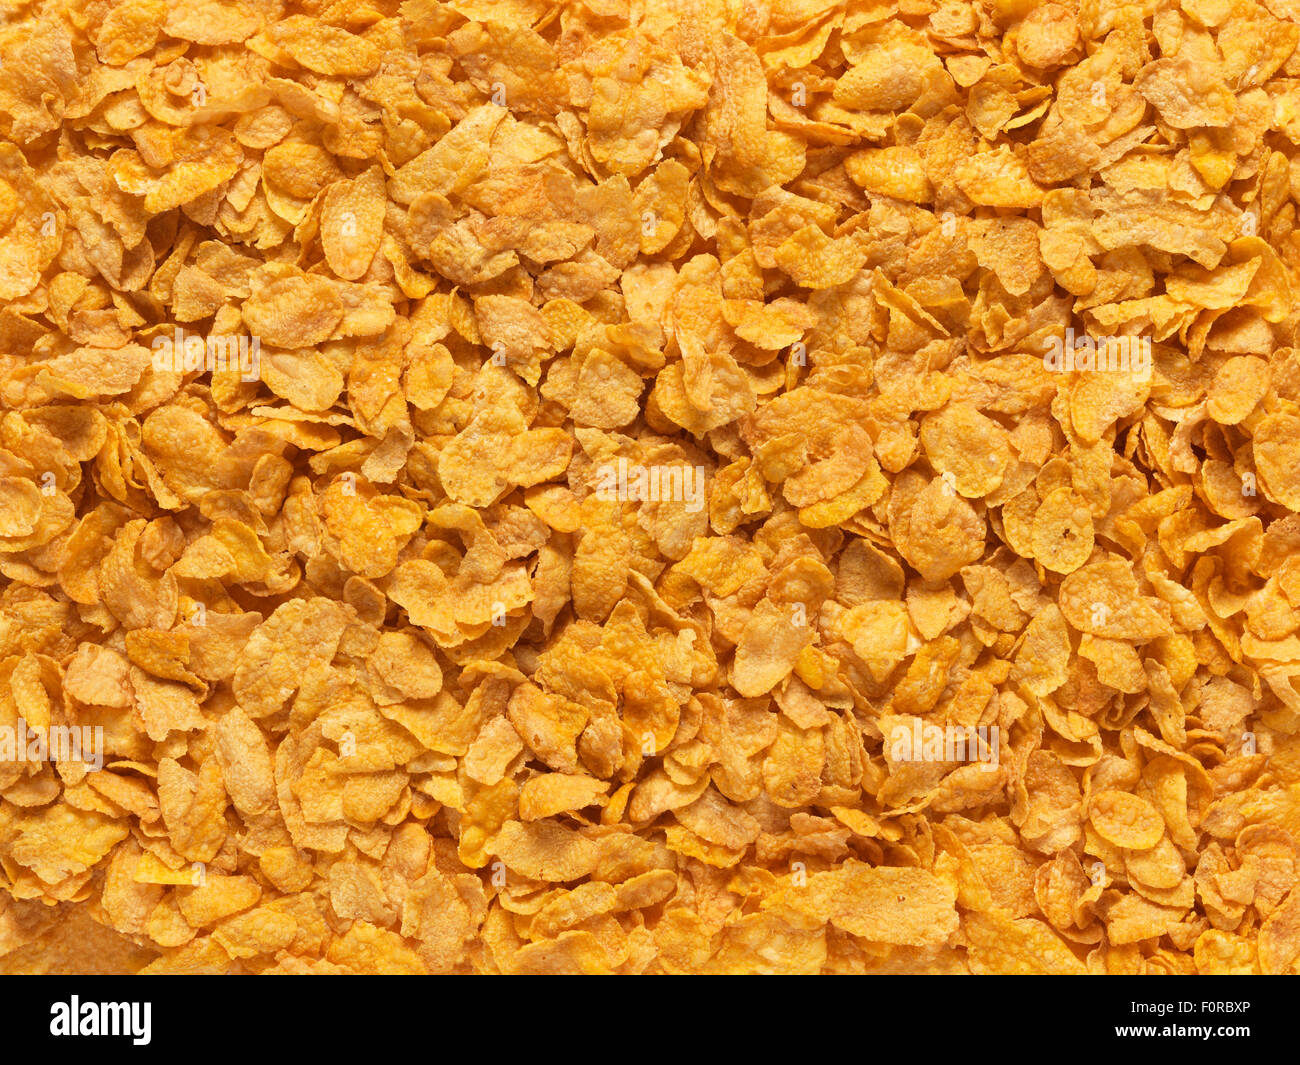 close up, full frame, shot of corn flaked breakfast cereal ideal for use a background imge Stock Photo